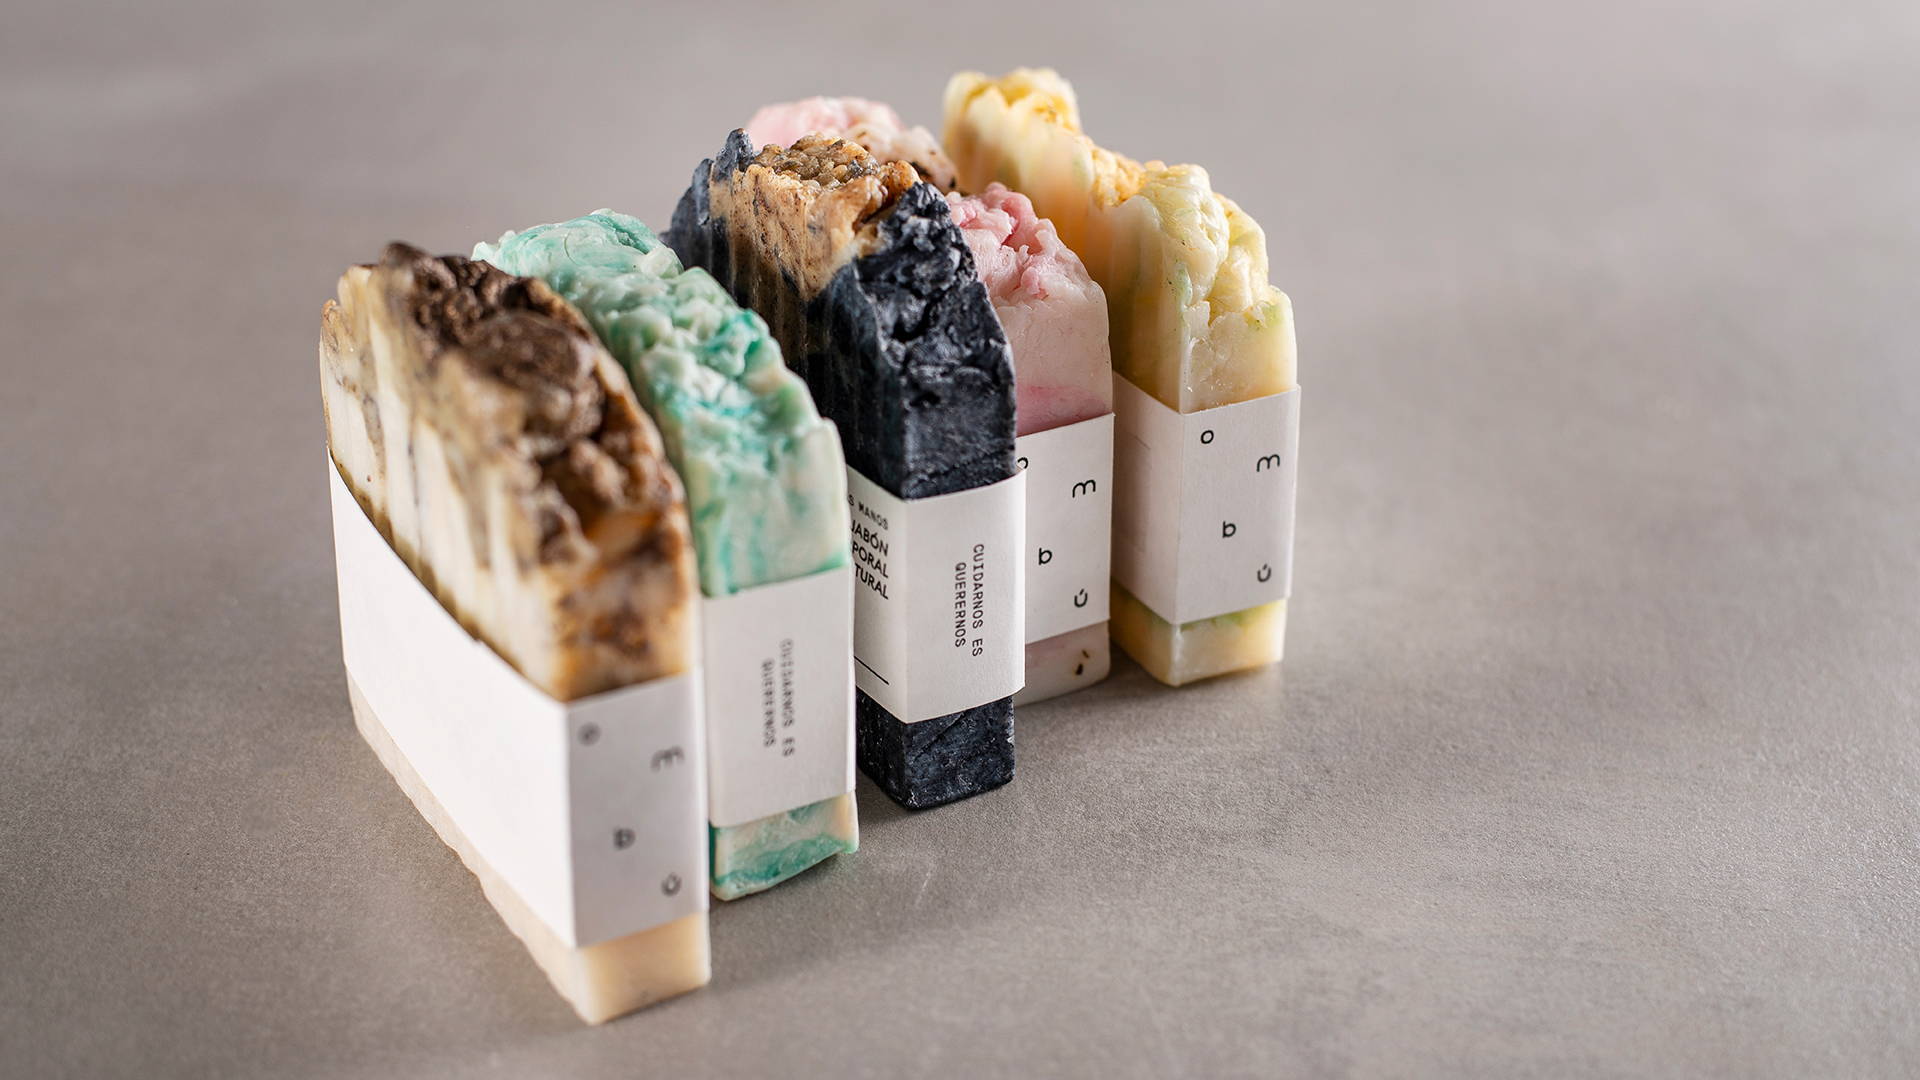 Featured image for Ombú Natural Soaps: Gorgeous Packaging on a Very Limited Budget